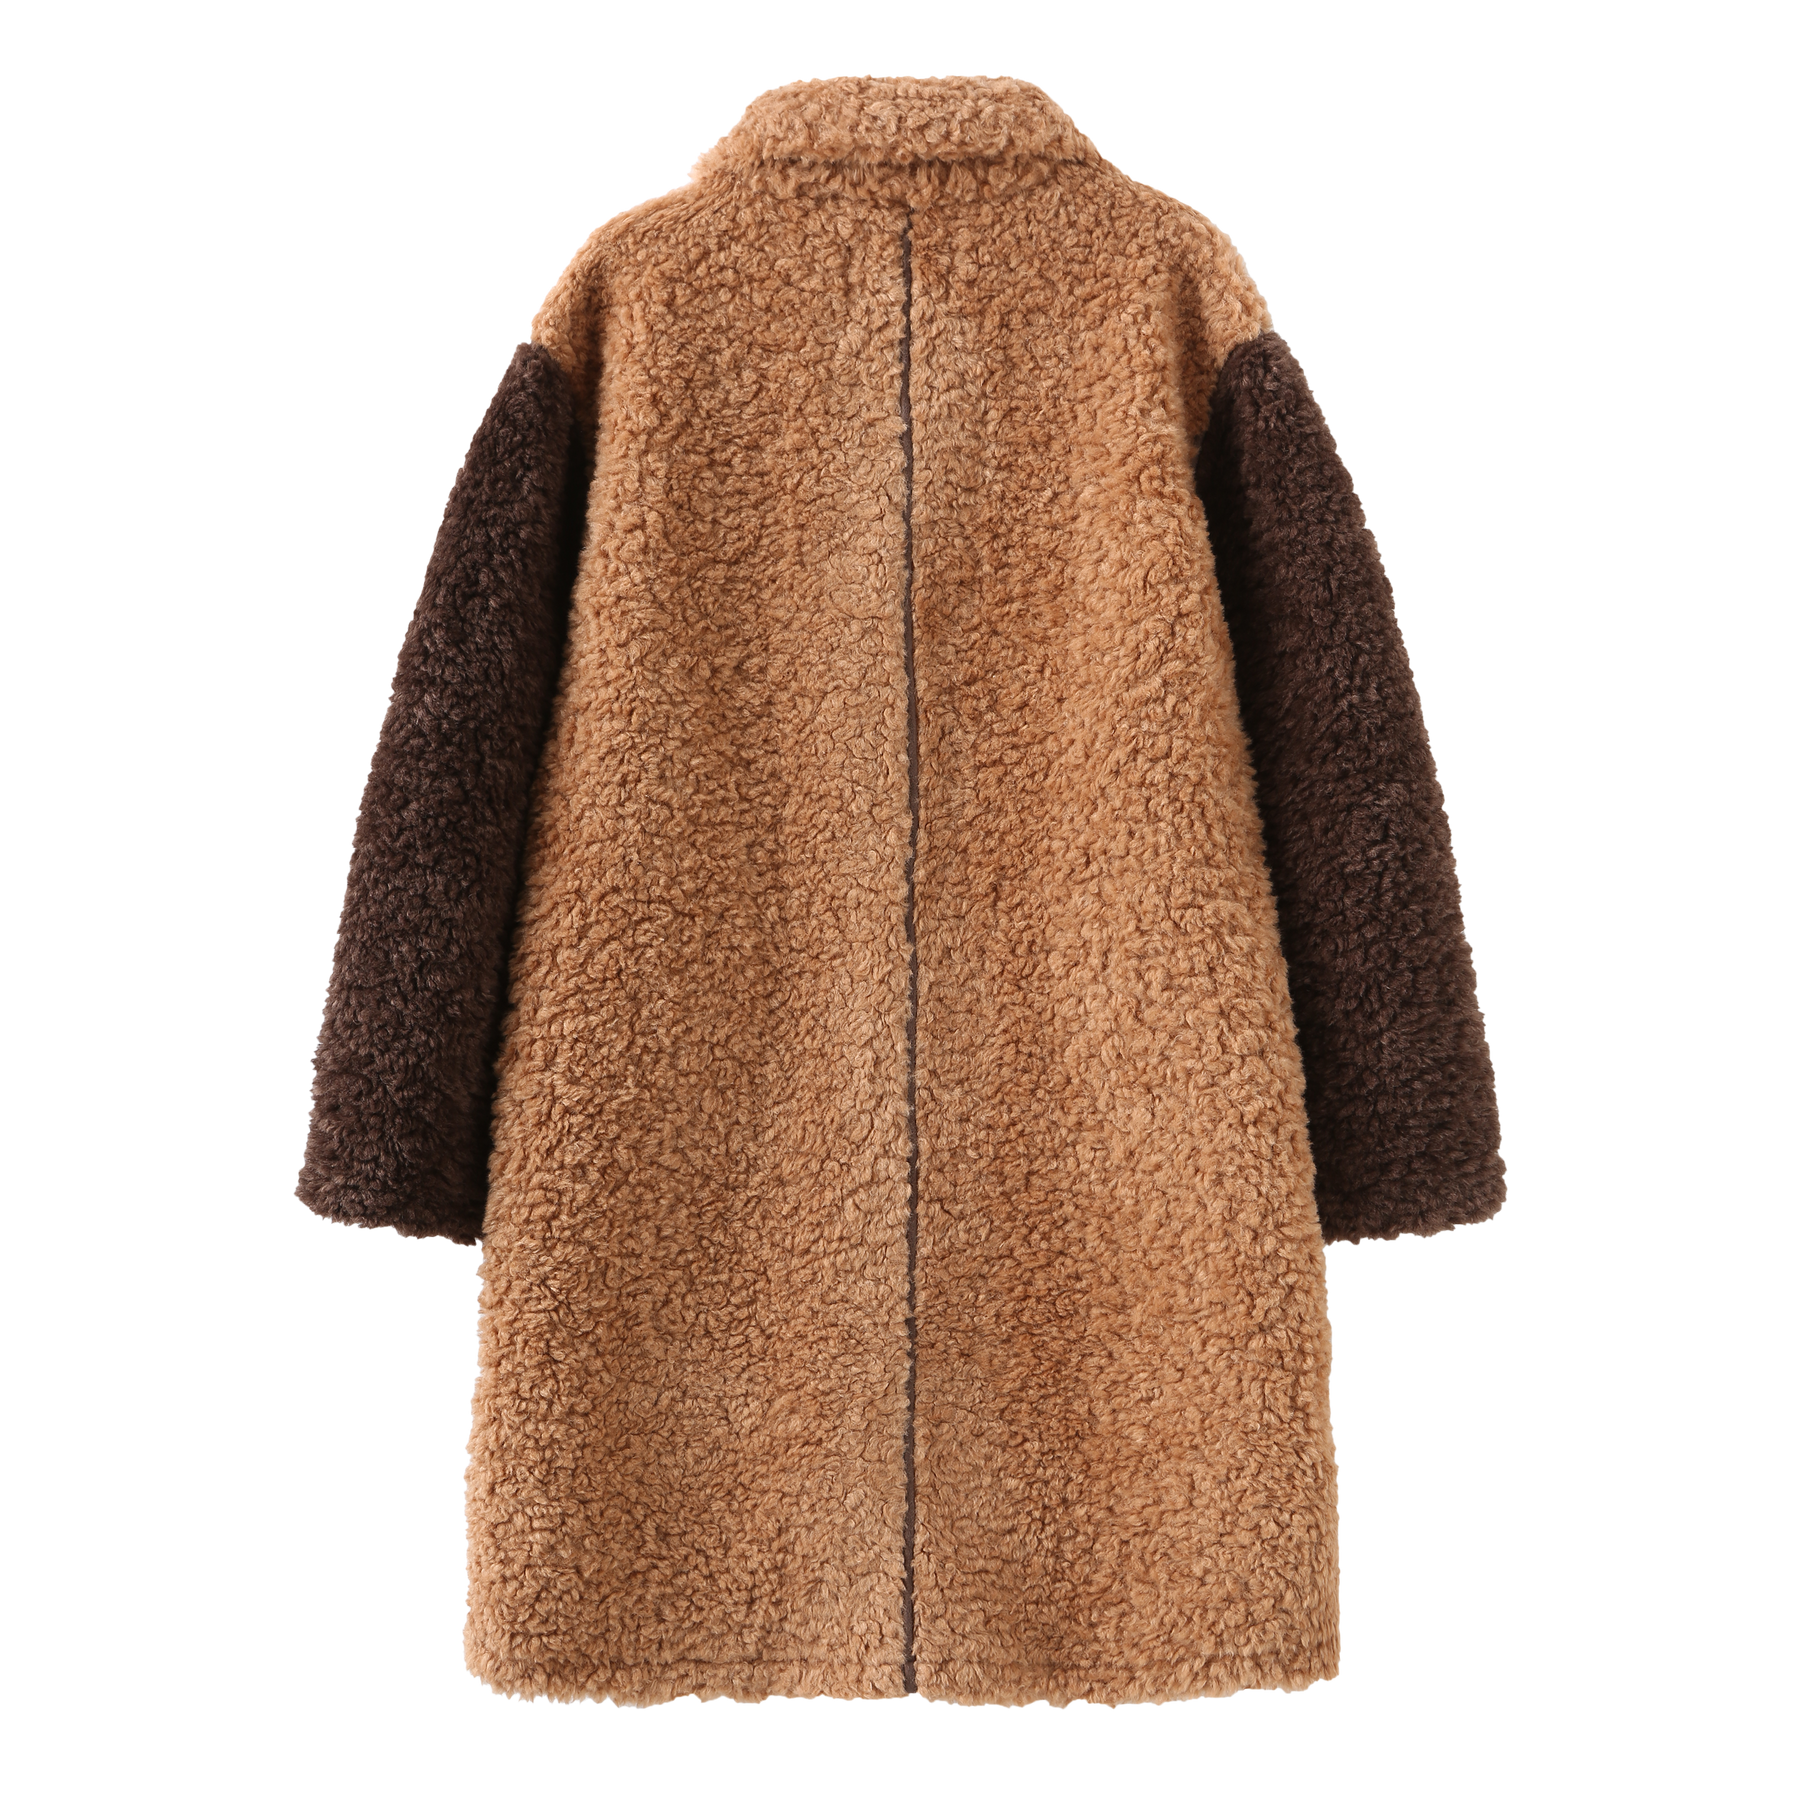 Teddy Jacket Long _ Brown Curry